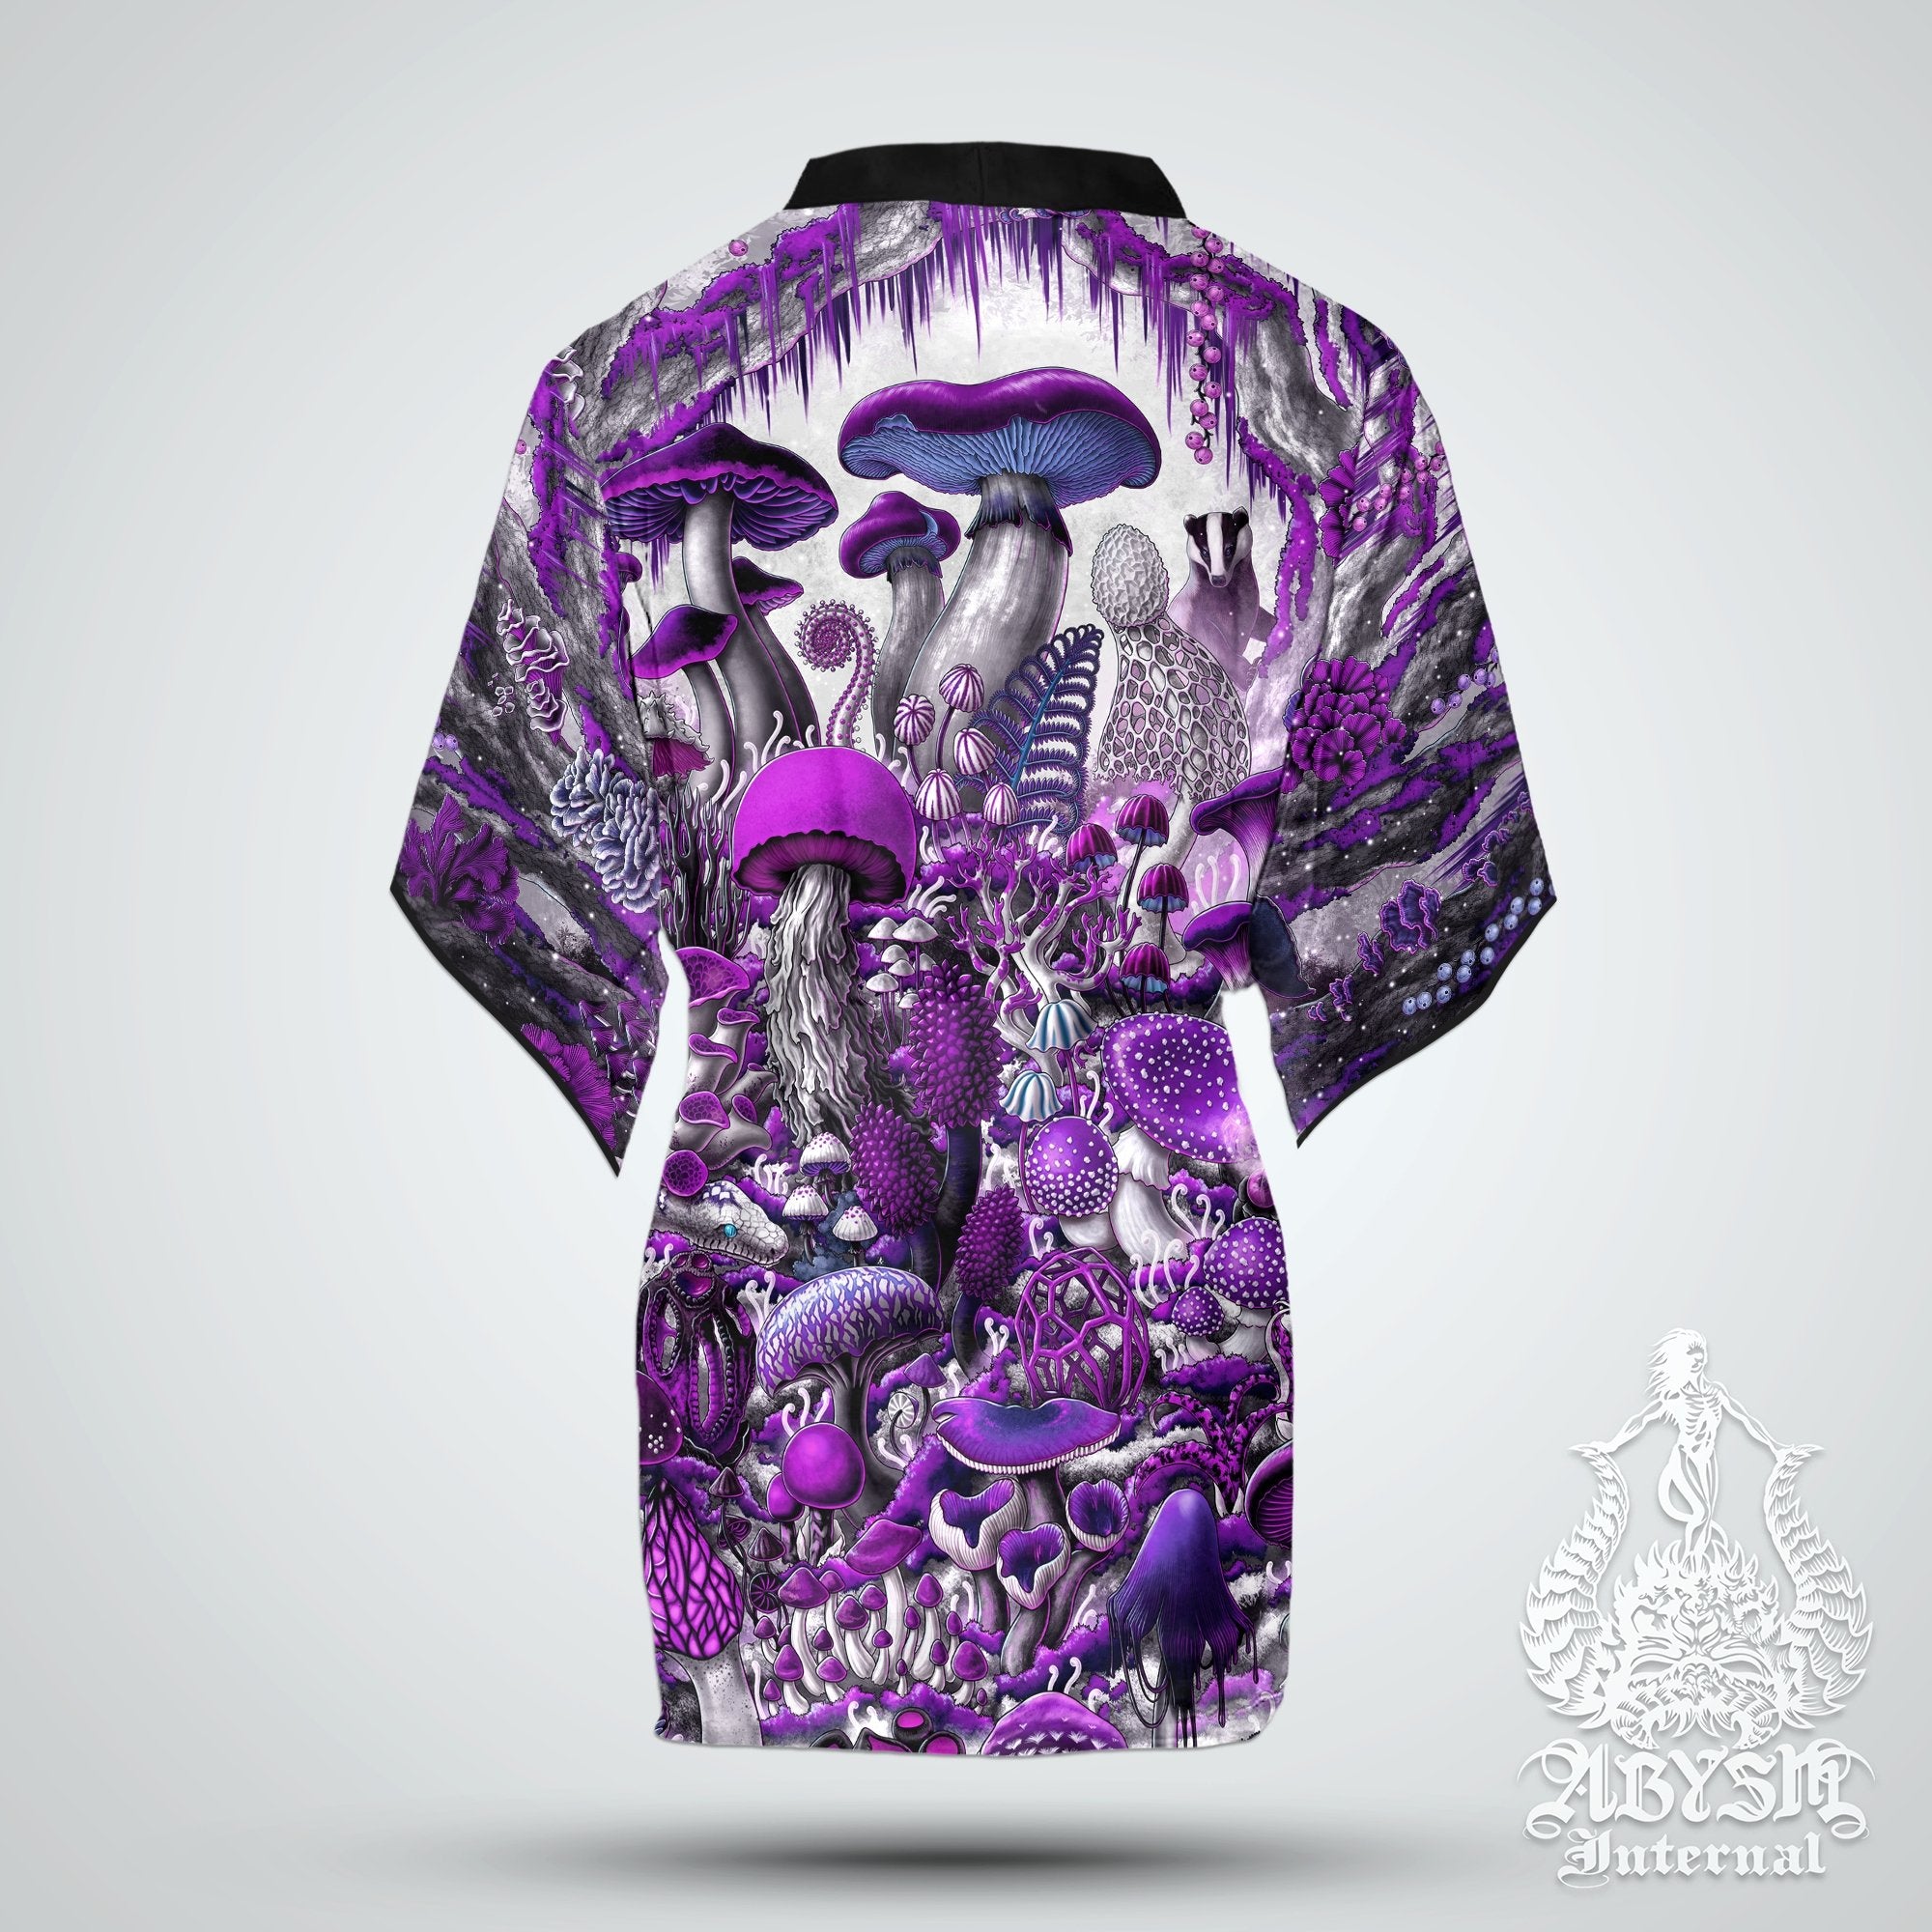 Mushrooms Cover Up, White Goth Outfit, Indie Party Kimono, Summer Festival Robe, Mycology Art, Biology Gift, Alternative Clothing, Unisex - Purple - Abysm Internal